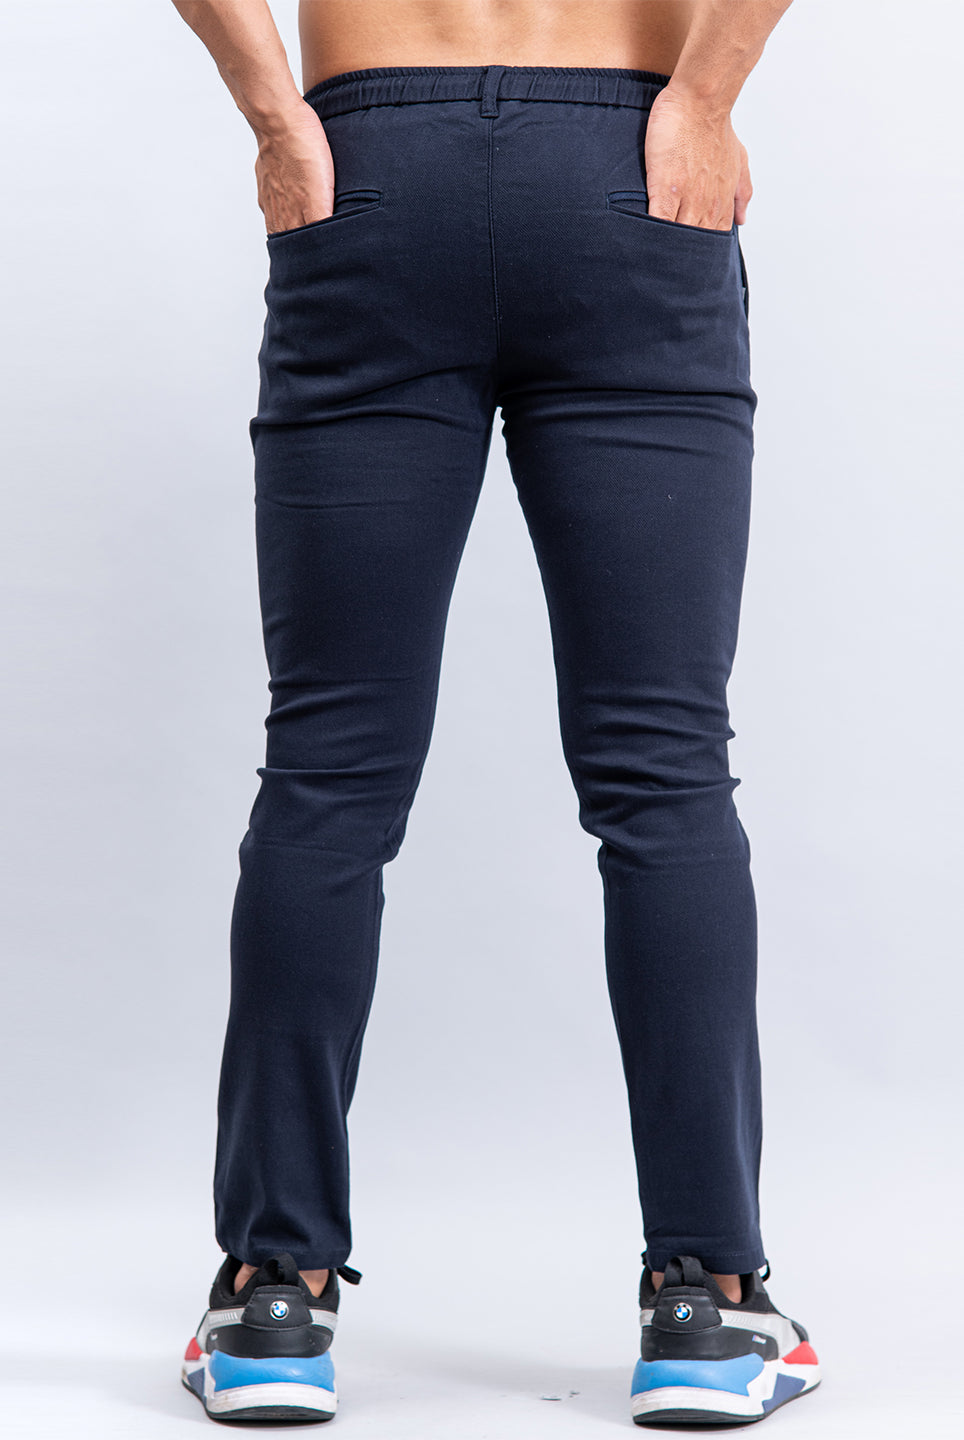 navy joggers for men